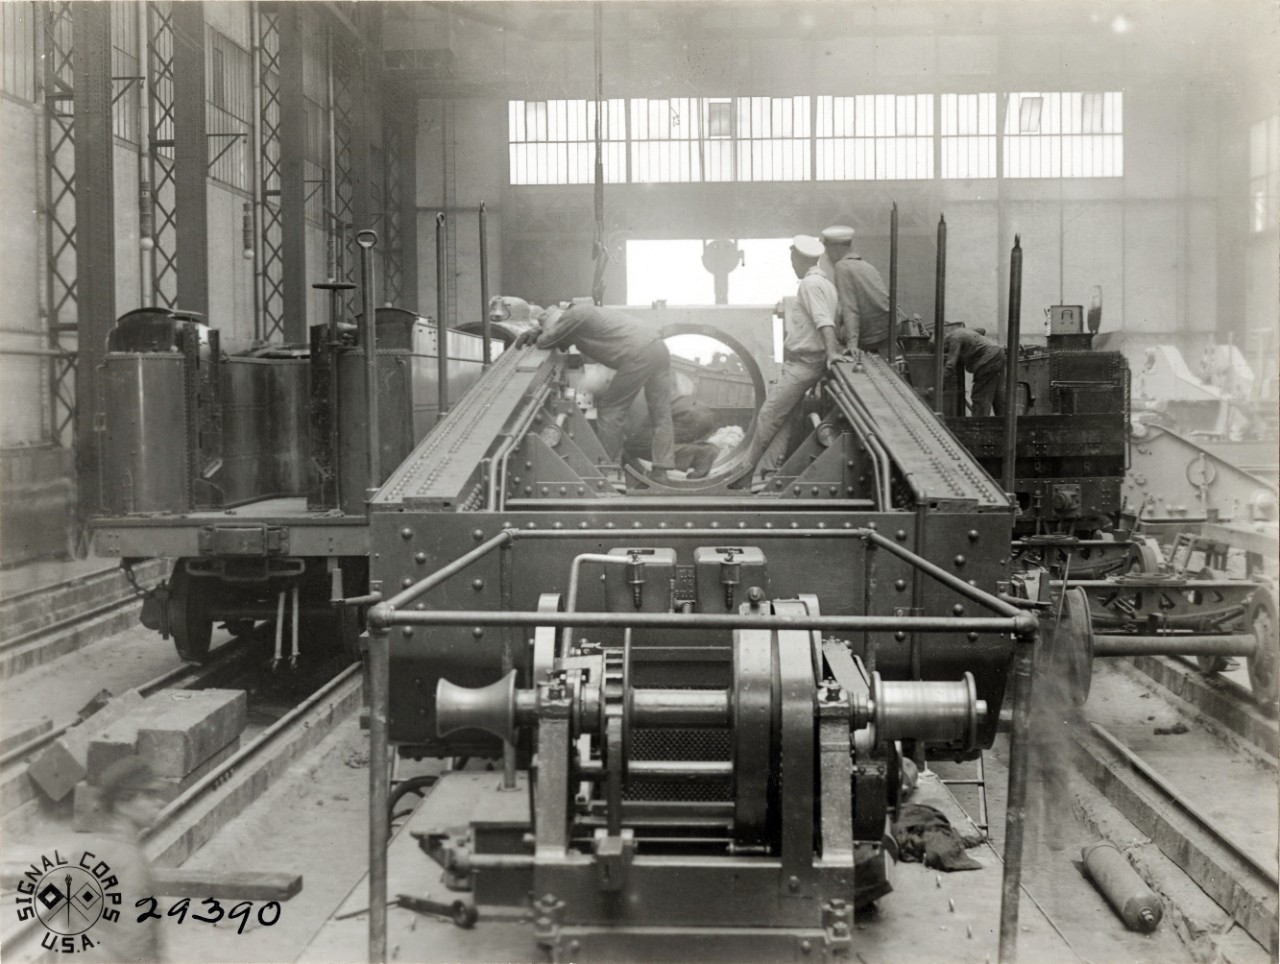 <p>111-SC-29390: 14-Inch Railway Gun. Men greasing the slide to receive the rifle at U.S. Naval Railway Battery, St. Nazaire, France. Photographed by Corporal L.H. McLaughlin, SC, August 1, 1918. U.S. Army Signal Corps Photograph, now in the collections of the National Archives. Archival photograph taken by Mr. James Poynor.</p>
